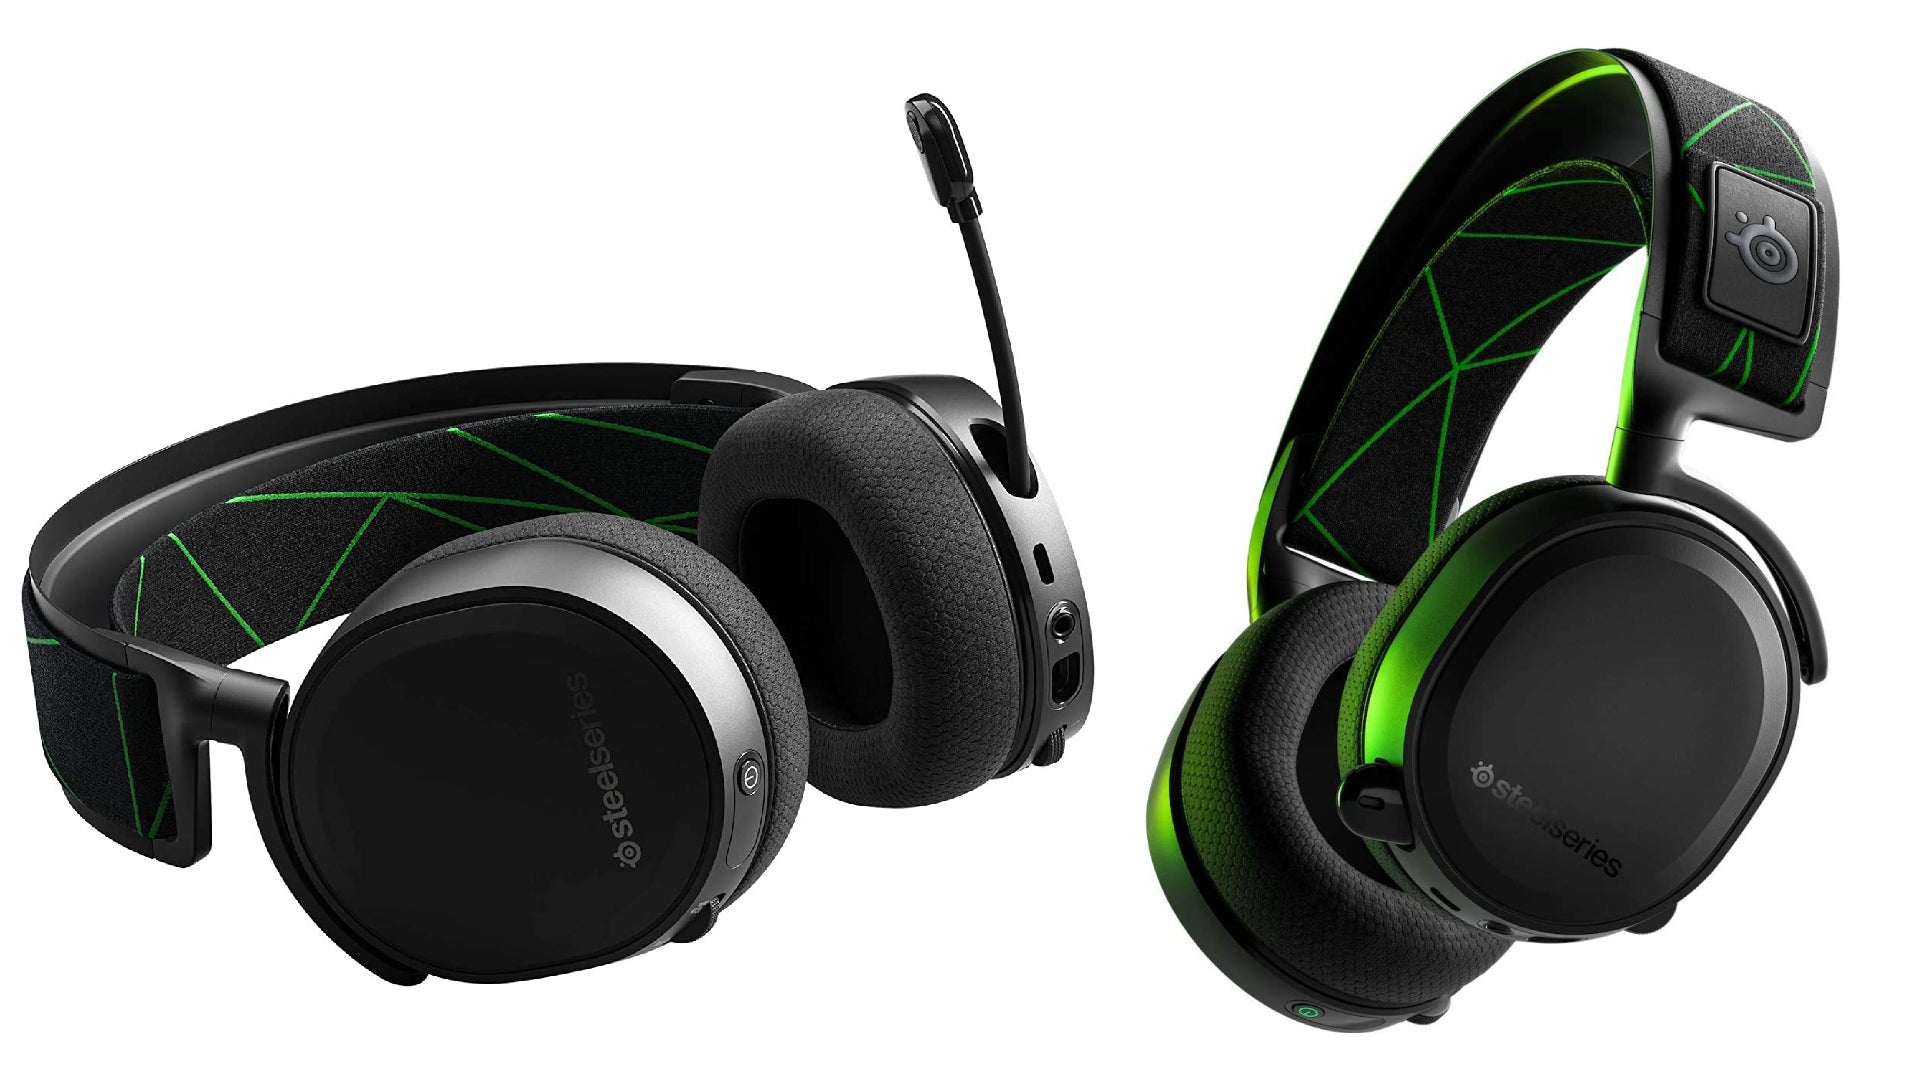 Image for The SteelSeries Arctis 7X wireless headset is £60/$50 cheaper right now.